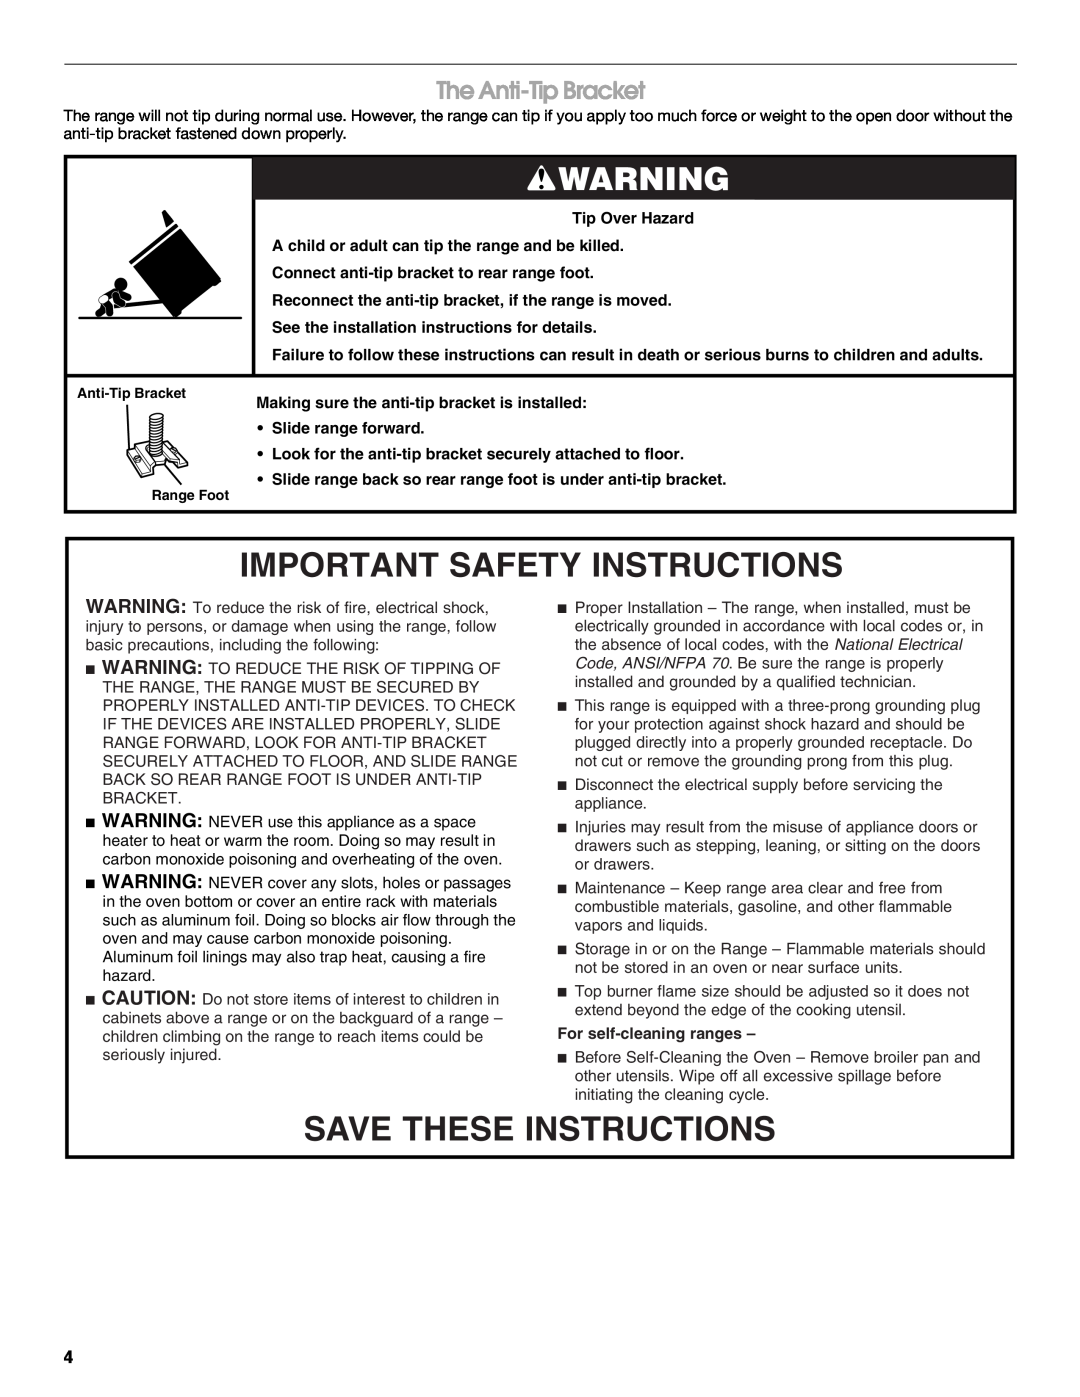 Whirlpool W10099480 Important Safety Instructions, Save These Instructions, The Anti-Tip Bracket, For self-cleaning ranges 